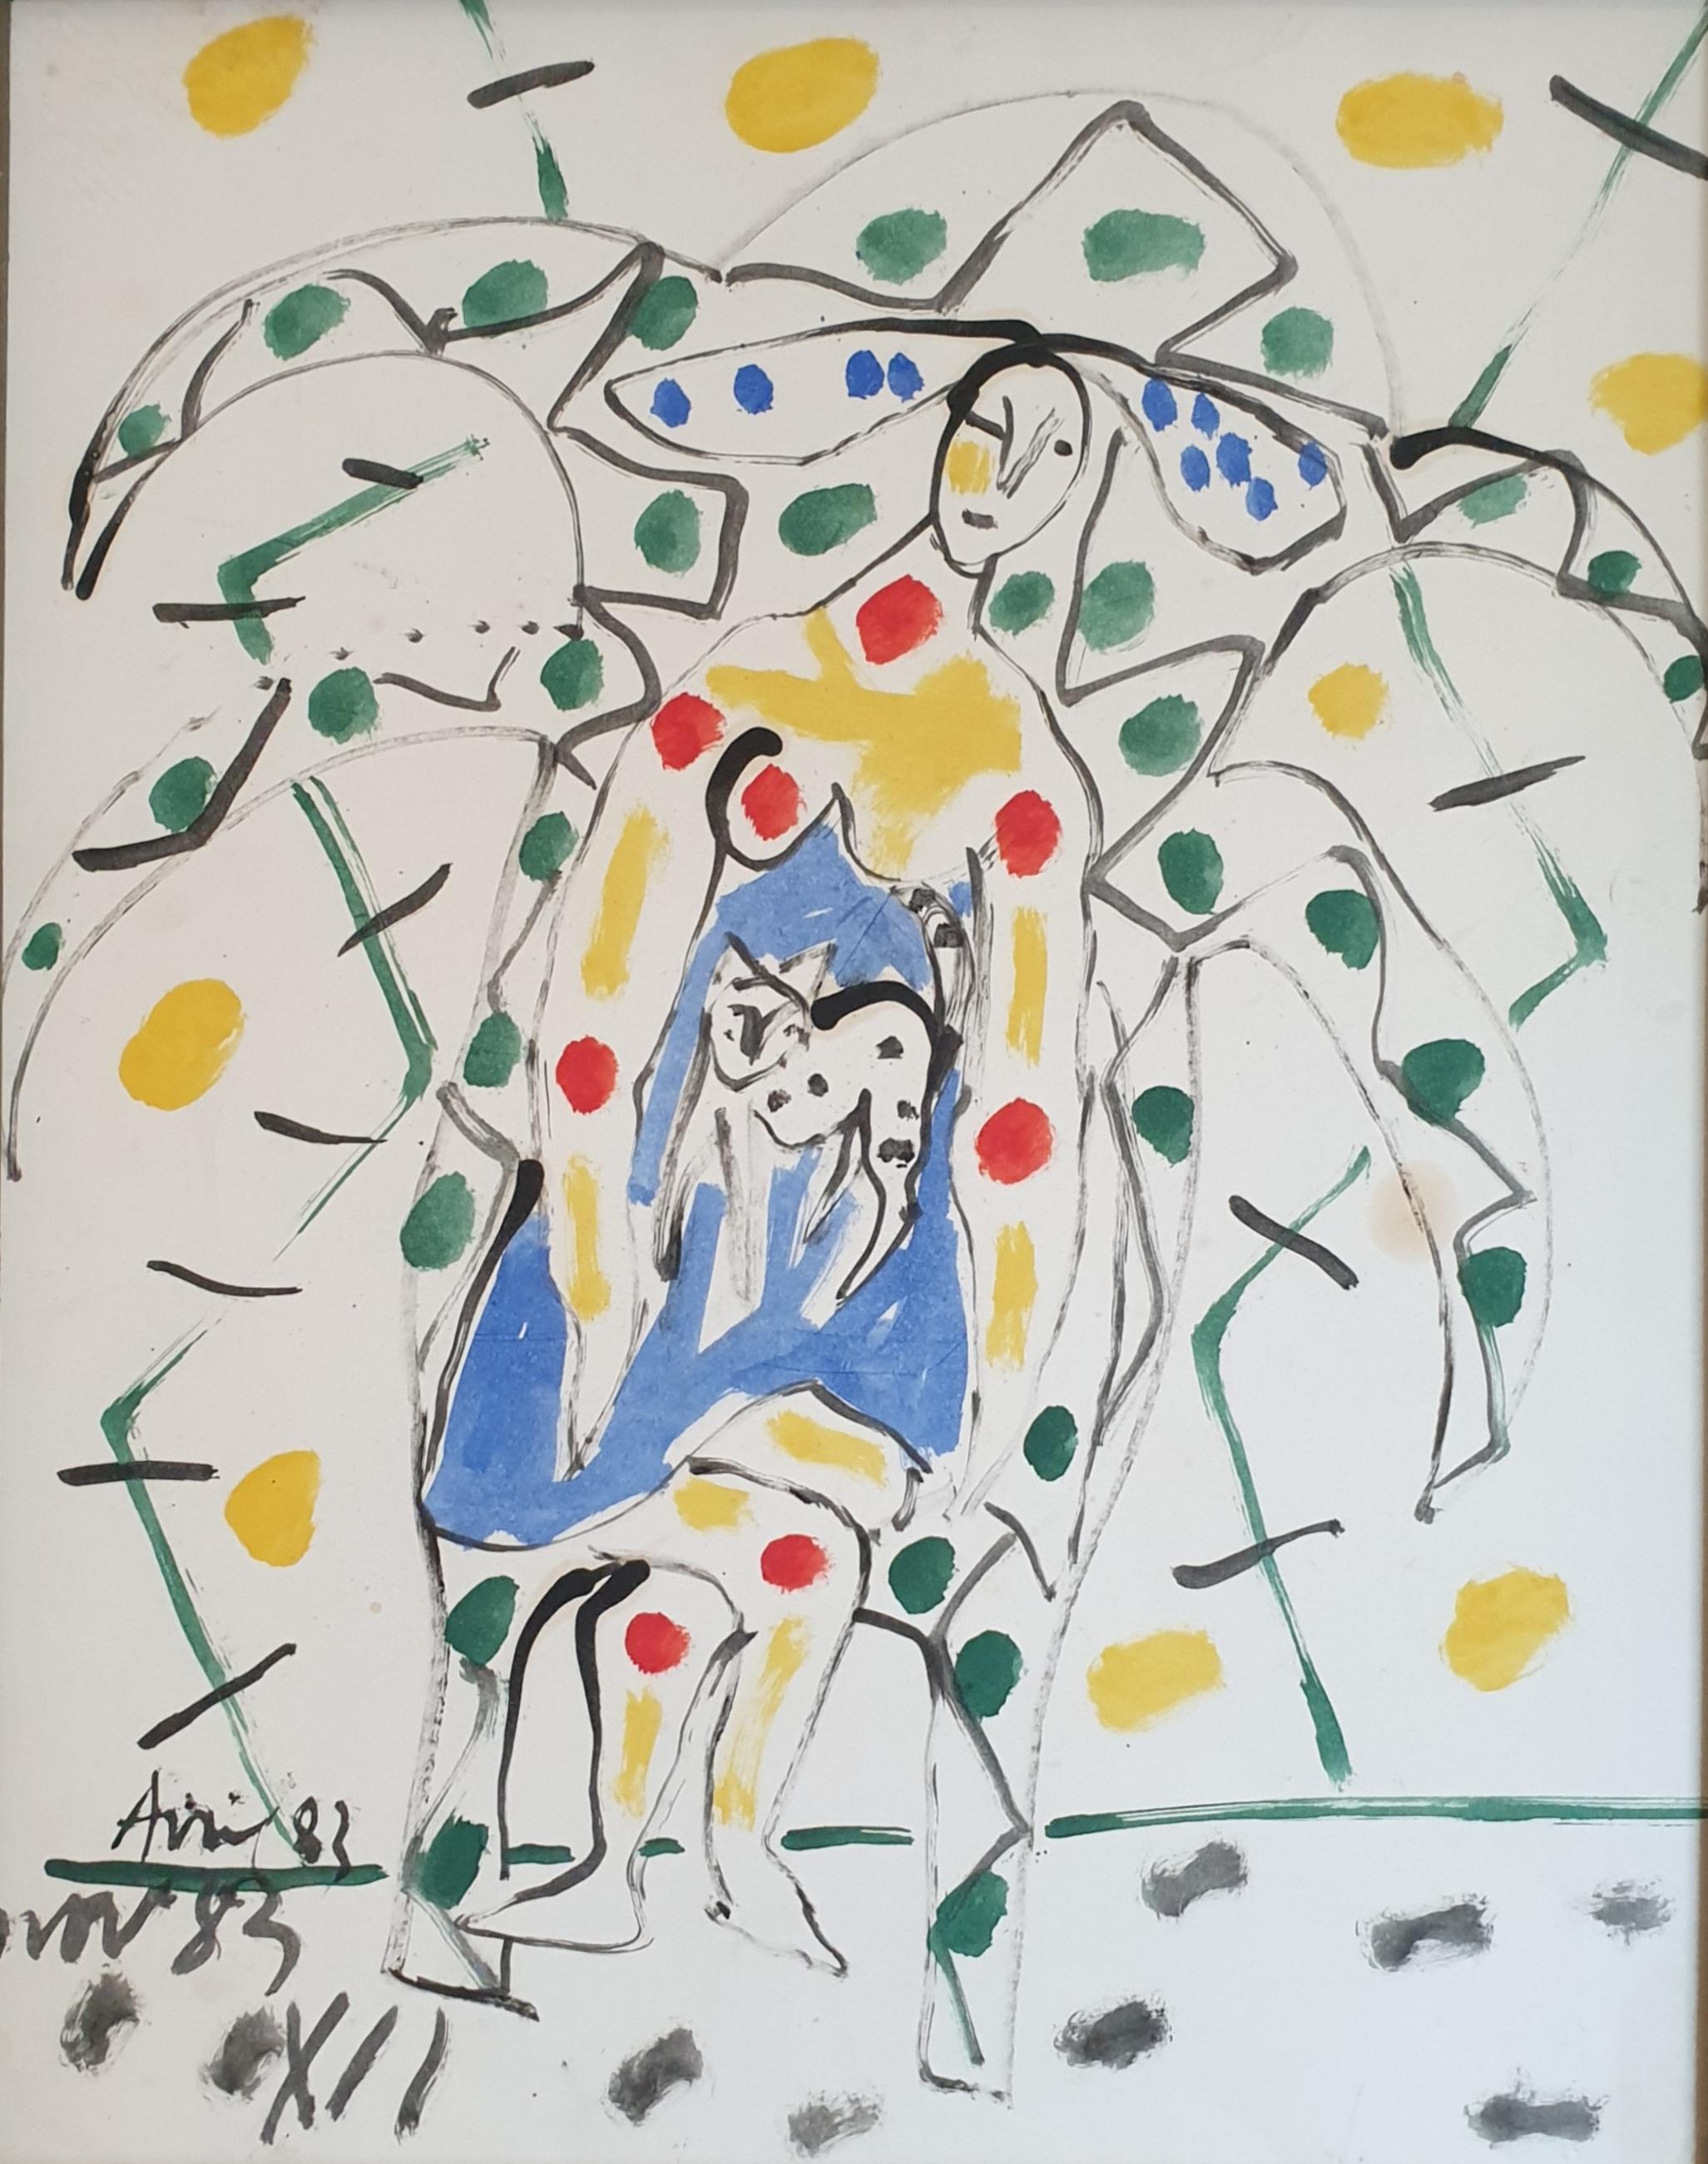 Woman Sitting With A Cat. Abstract Expressionist Work on Paper. - Painting by Armand Avril